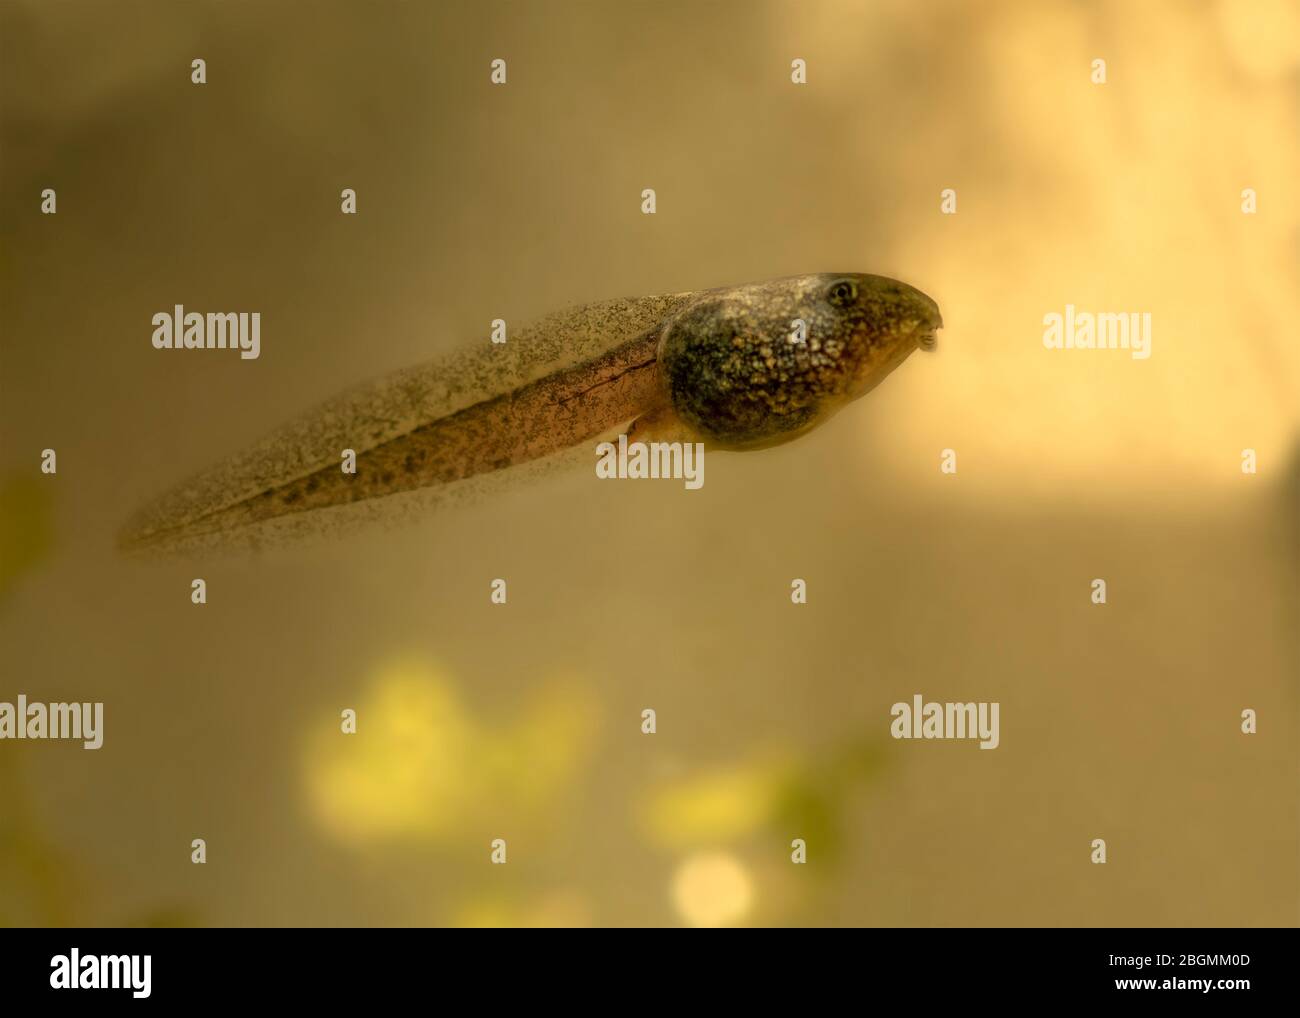 close up and detailed single  colourful  tadpole with tiny back legs  , clean background for copy space or text overlay Stock Photo